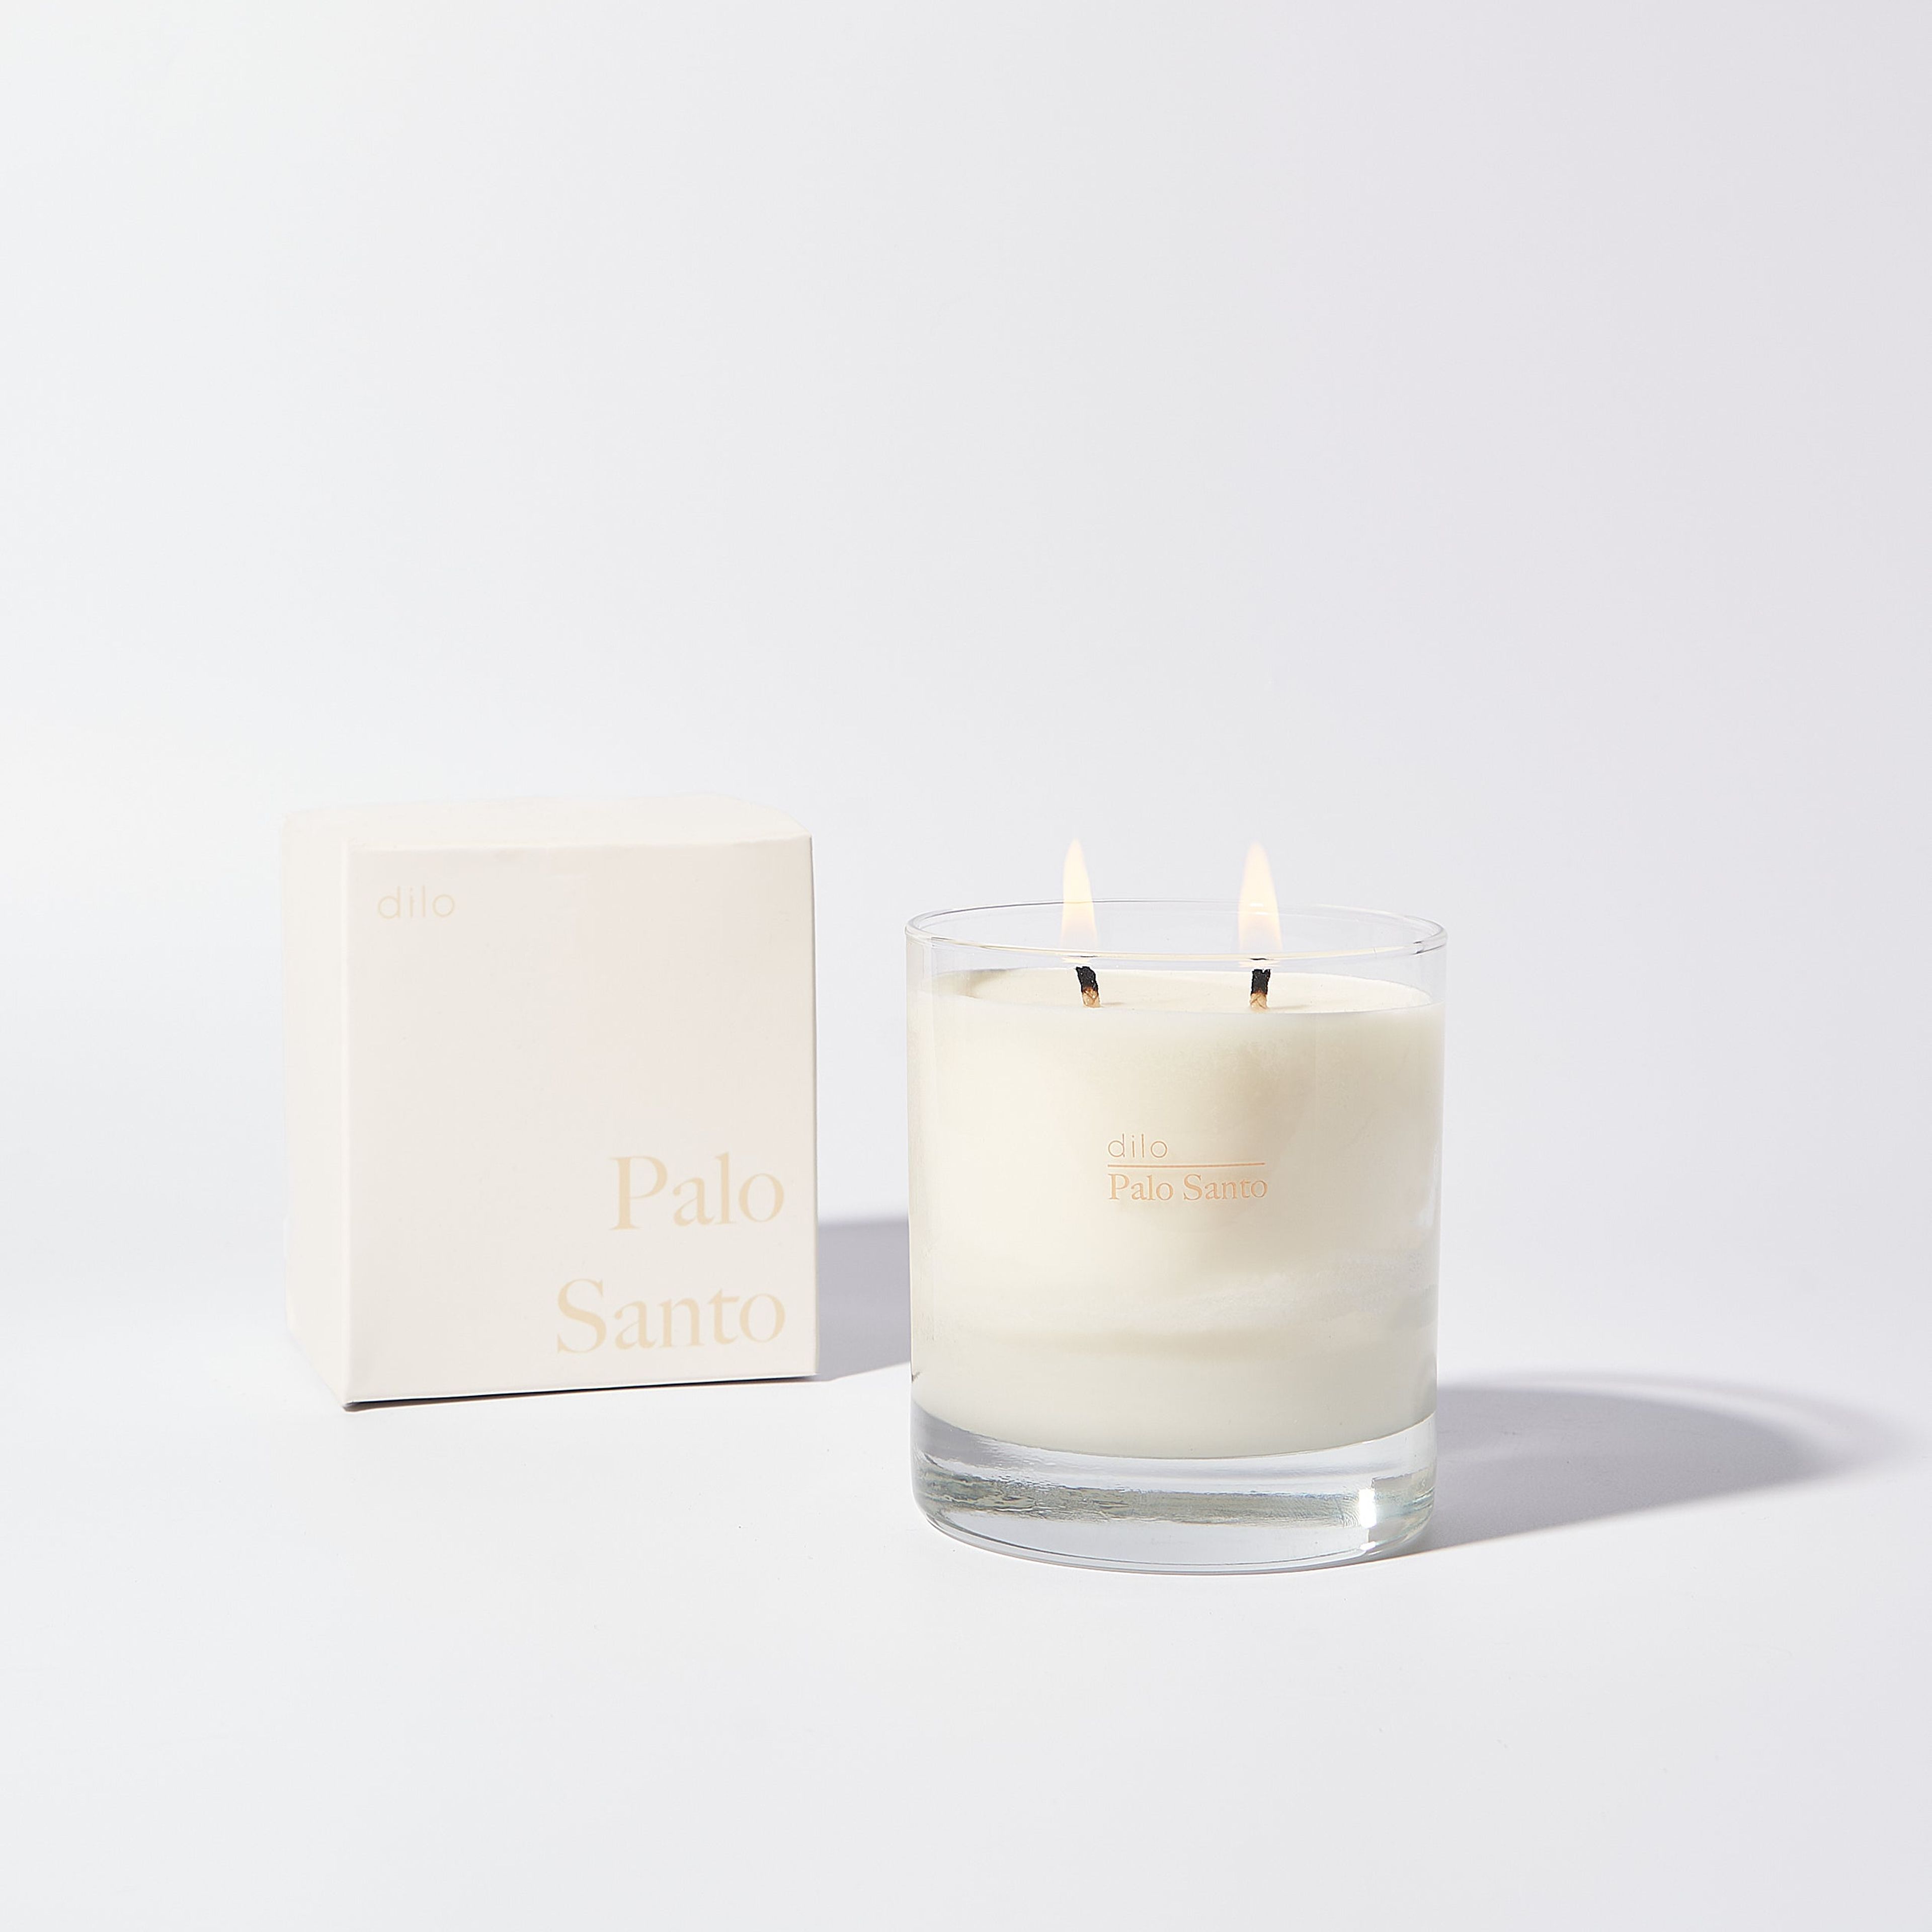 Palo Santo Candle by Dilo